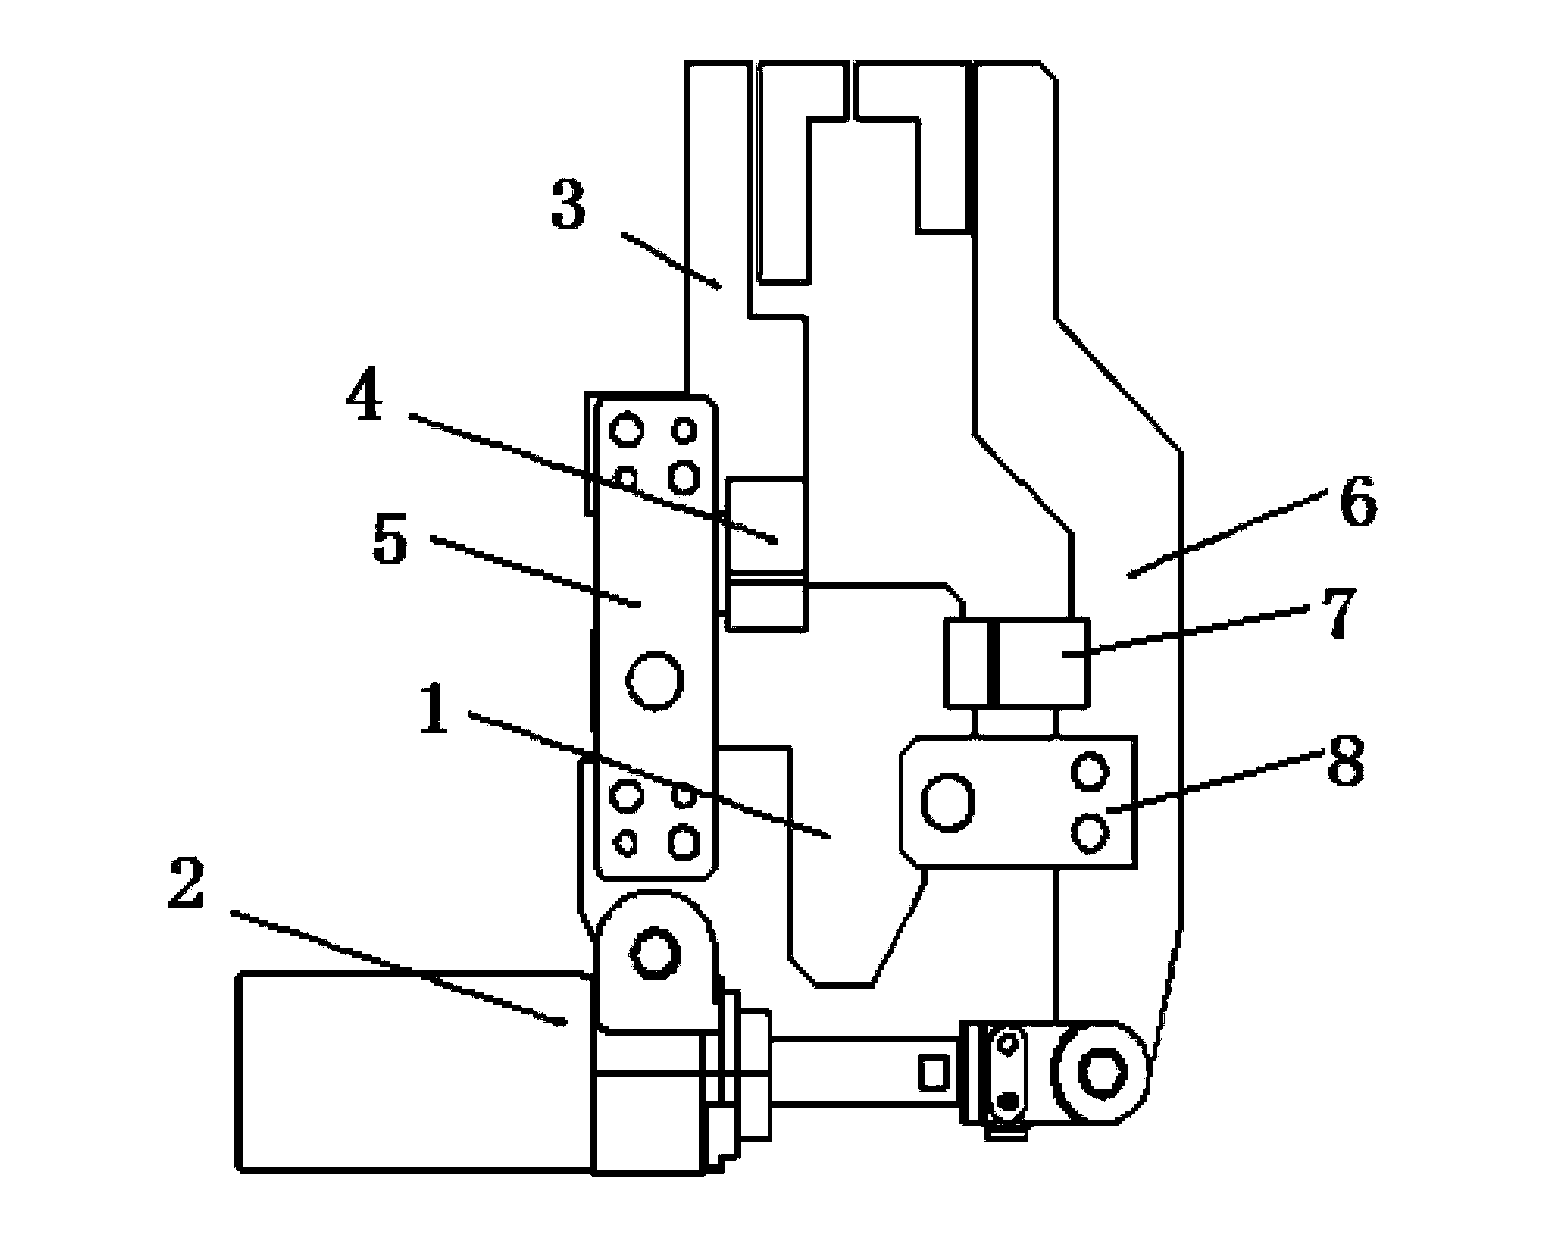 Double-face clamping device for locating and clamping automobile parts